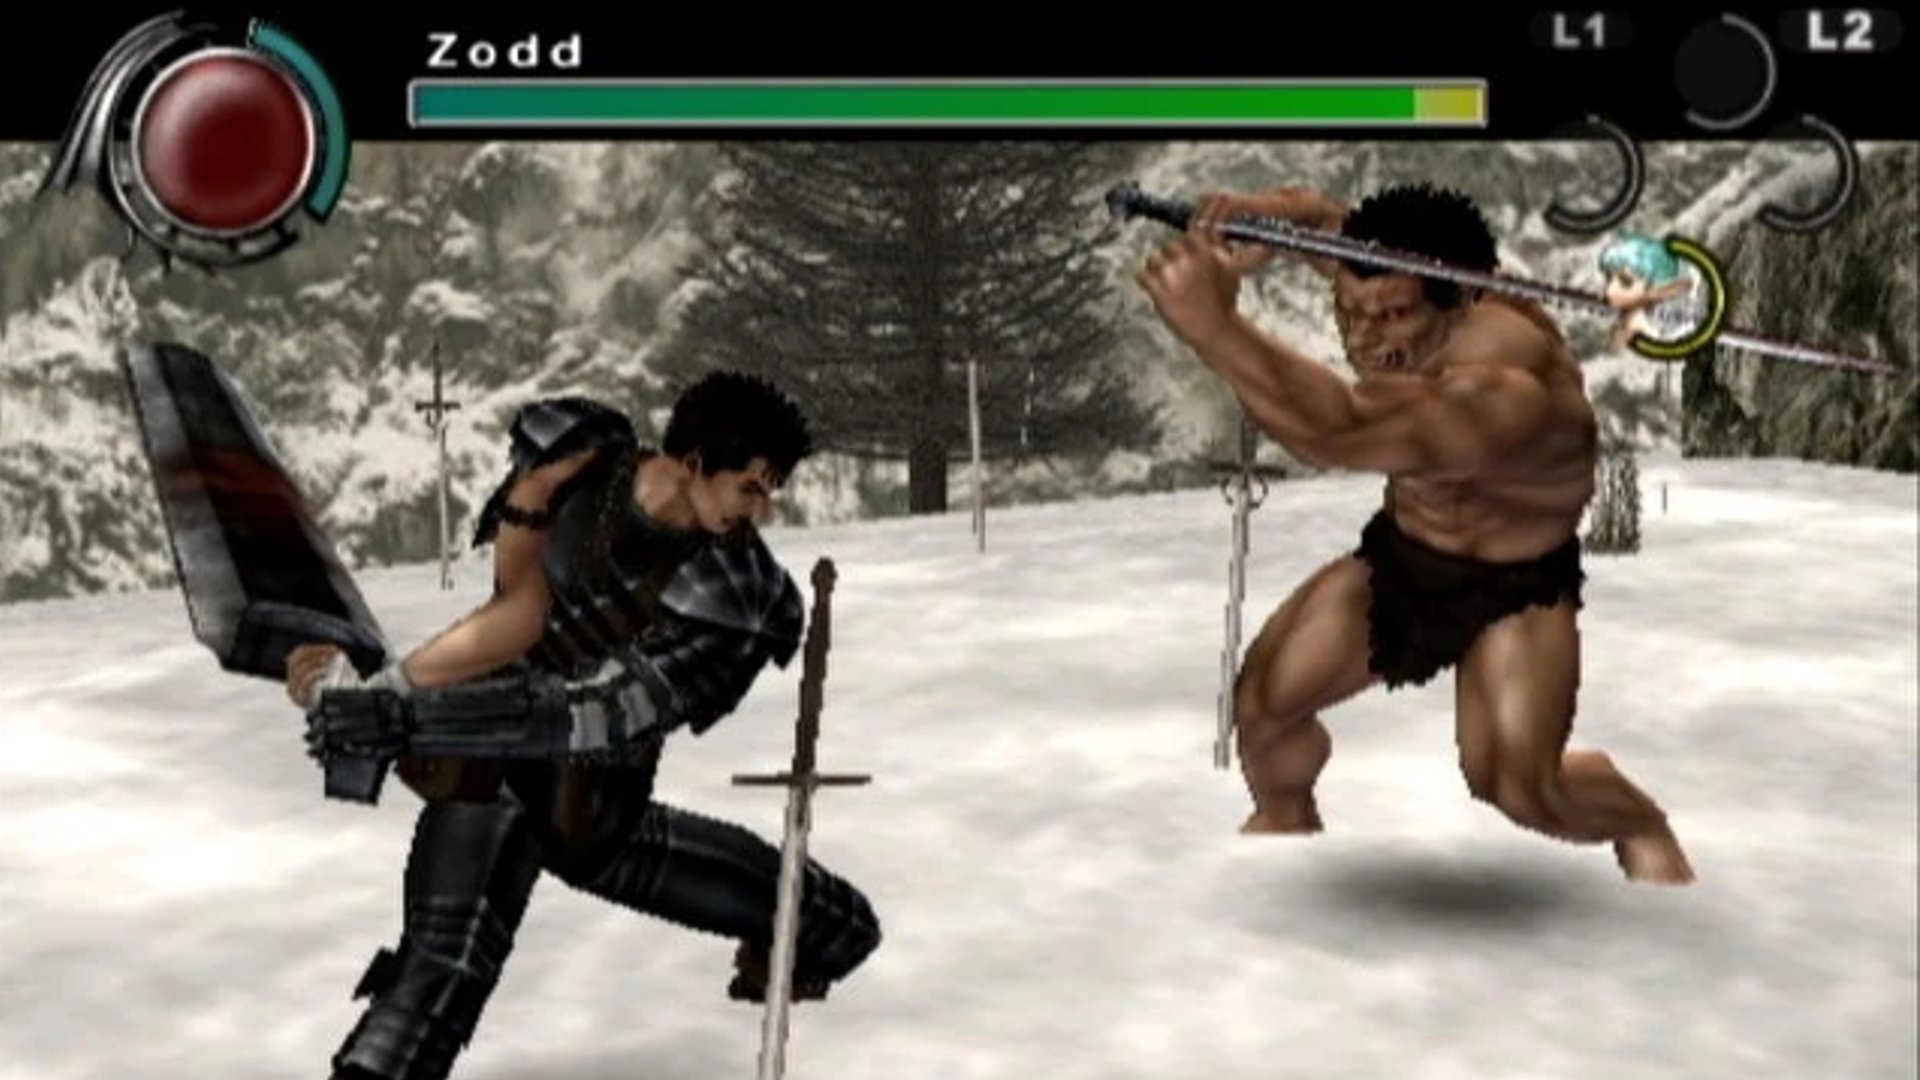 A player can be seen fighting an enemy